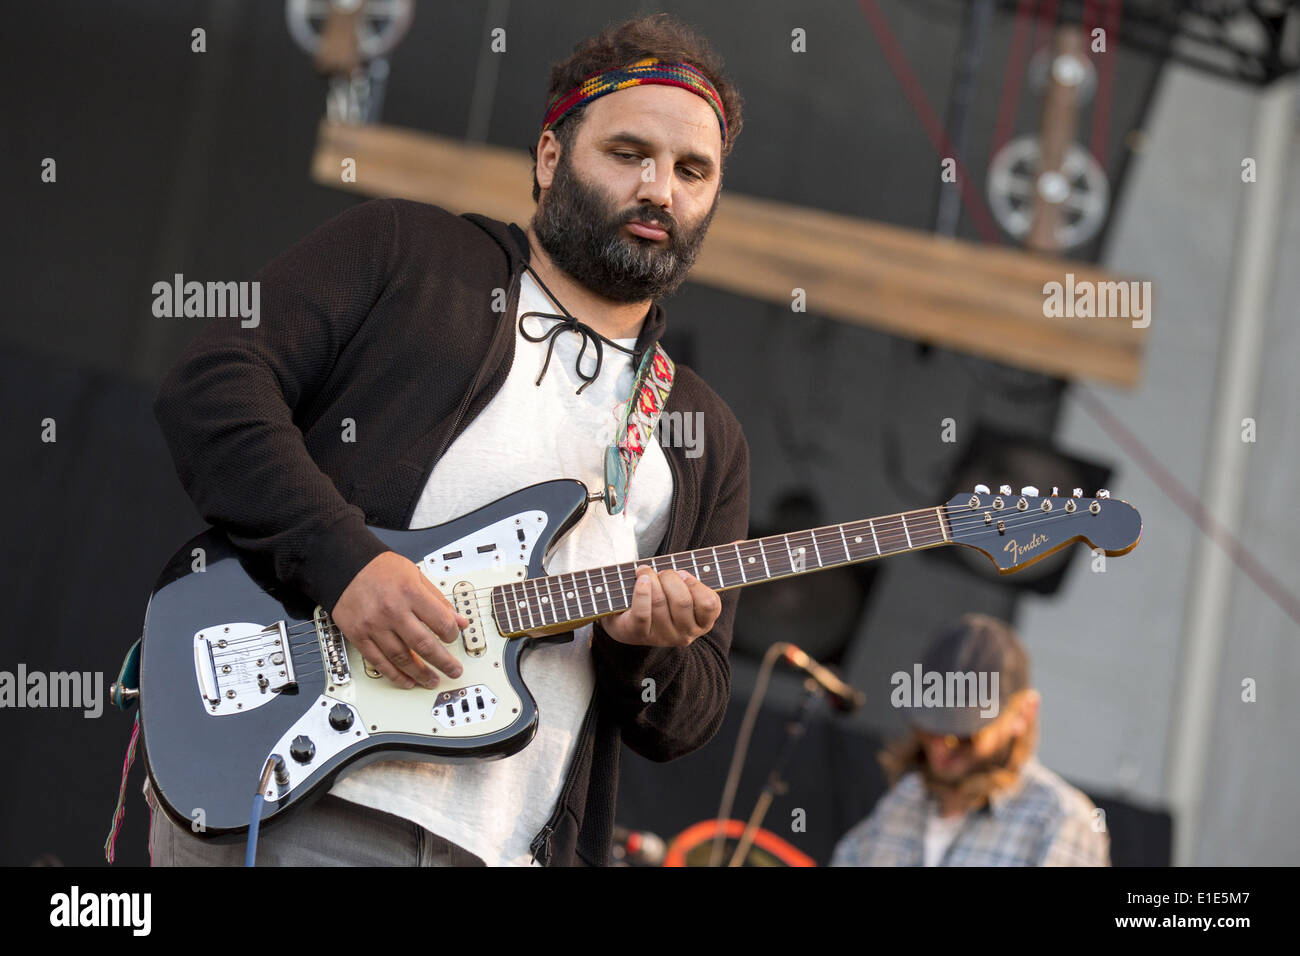 Chicago, Illinois, USA. 31st May, 2014. NICO AGLIETTI performs with Edward Sharpe and the Magnetic Zeros at the FirstMerit Bank Pavilion at Northerly Island in Chicago, Illinois © Daniel DeSlover/ZUMAPRESS.com/Alamy Live News Stock Photo